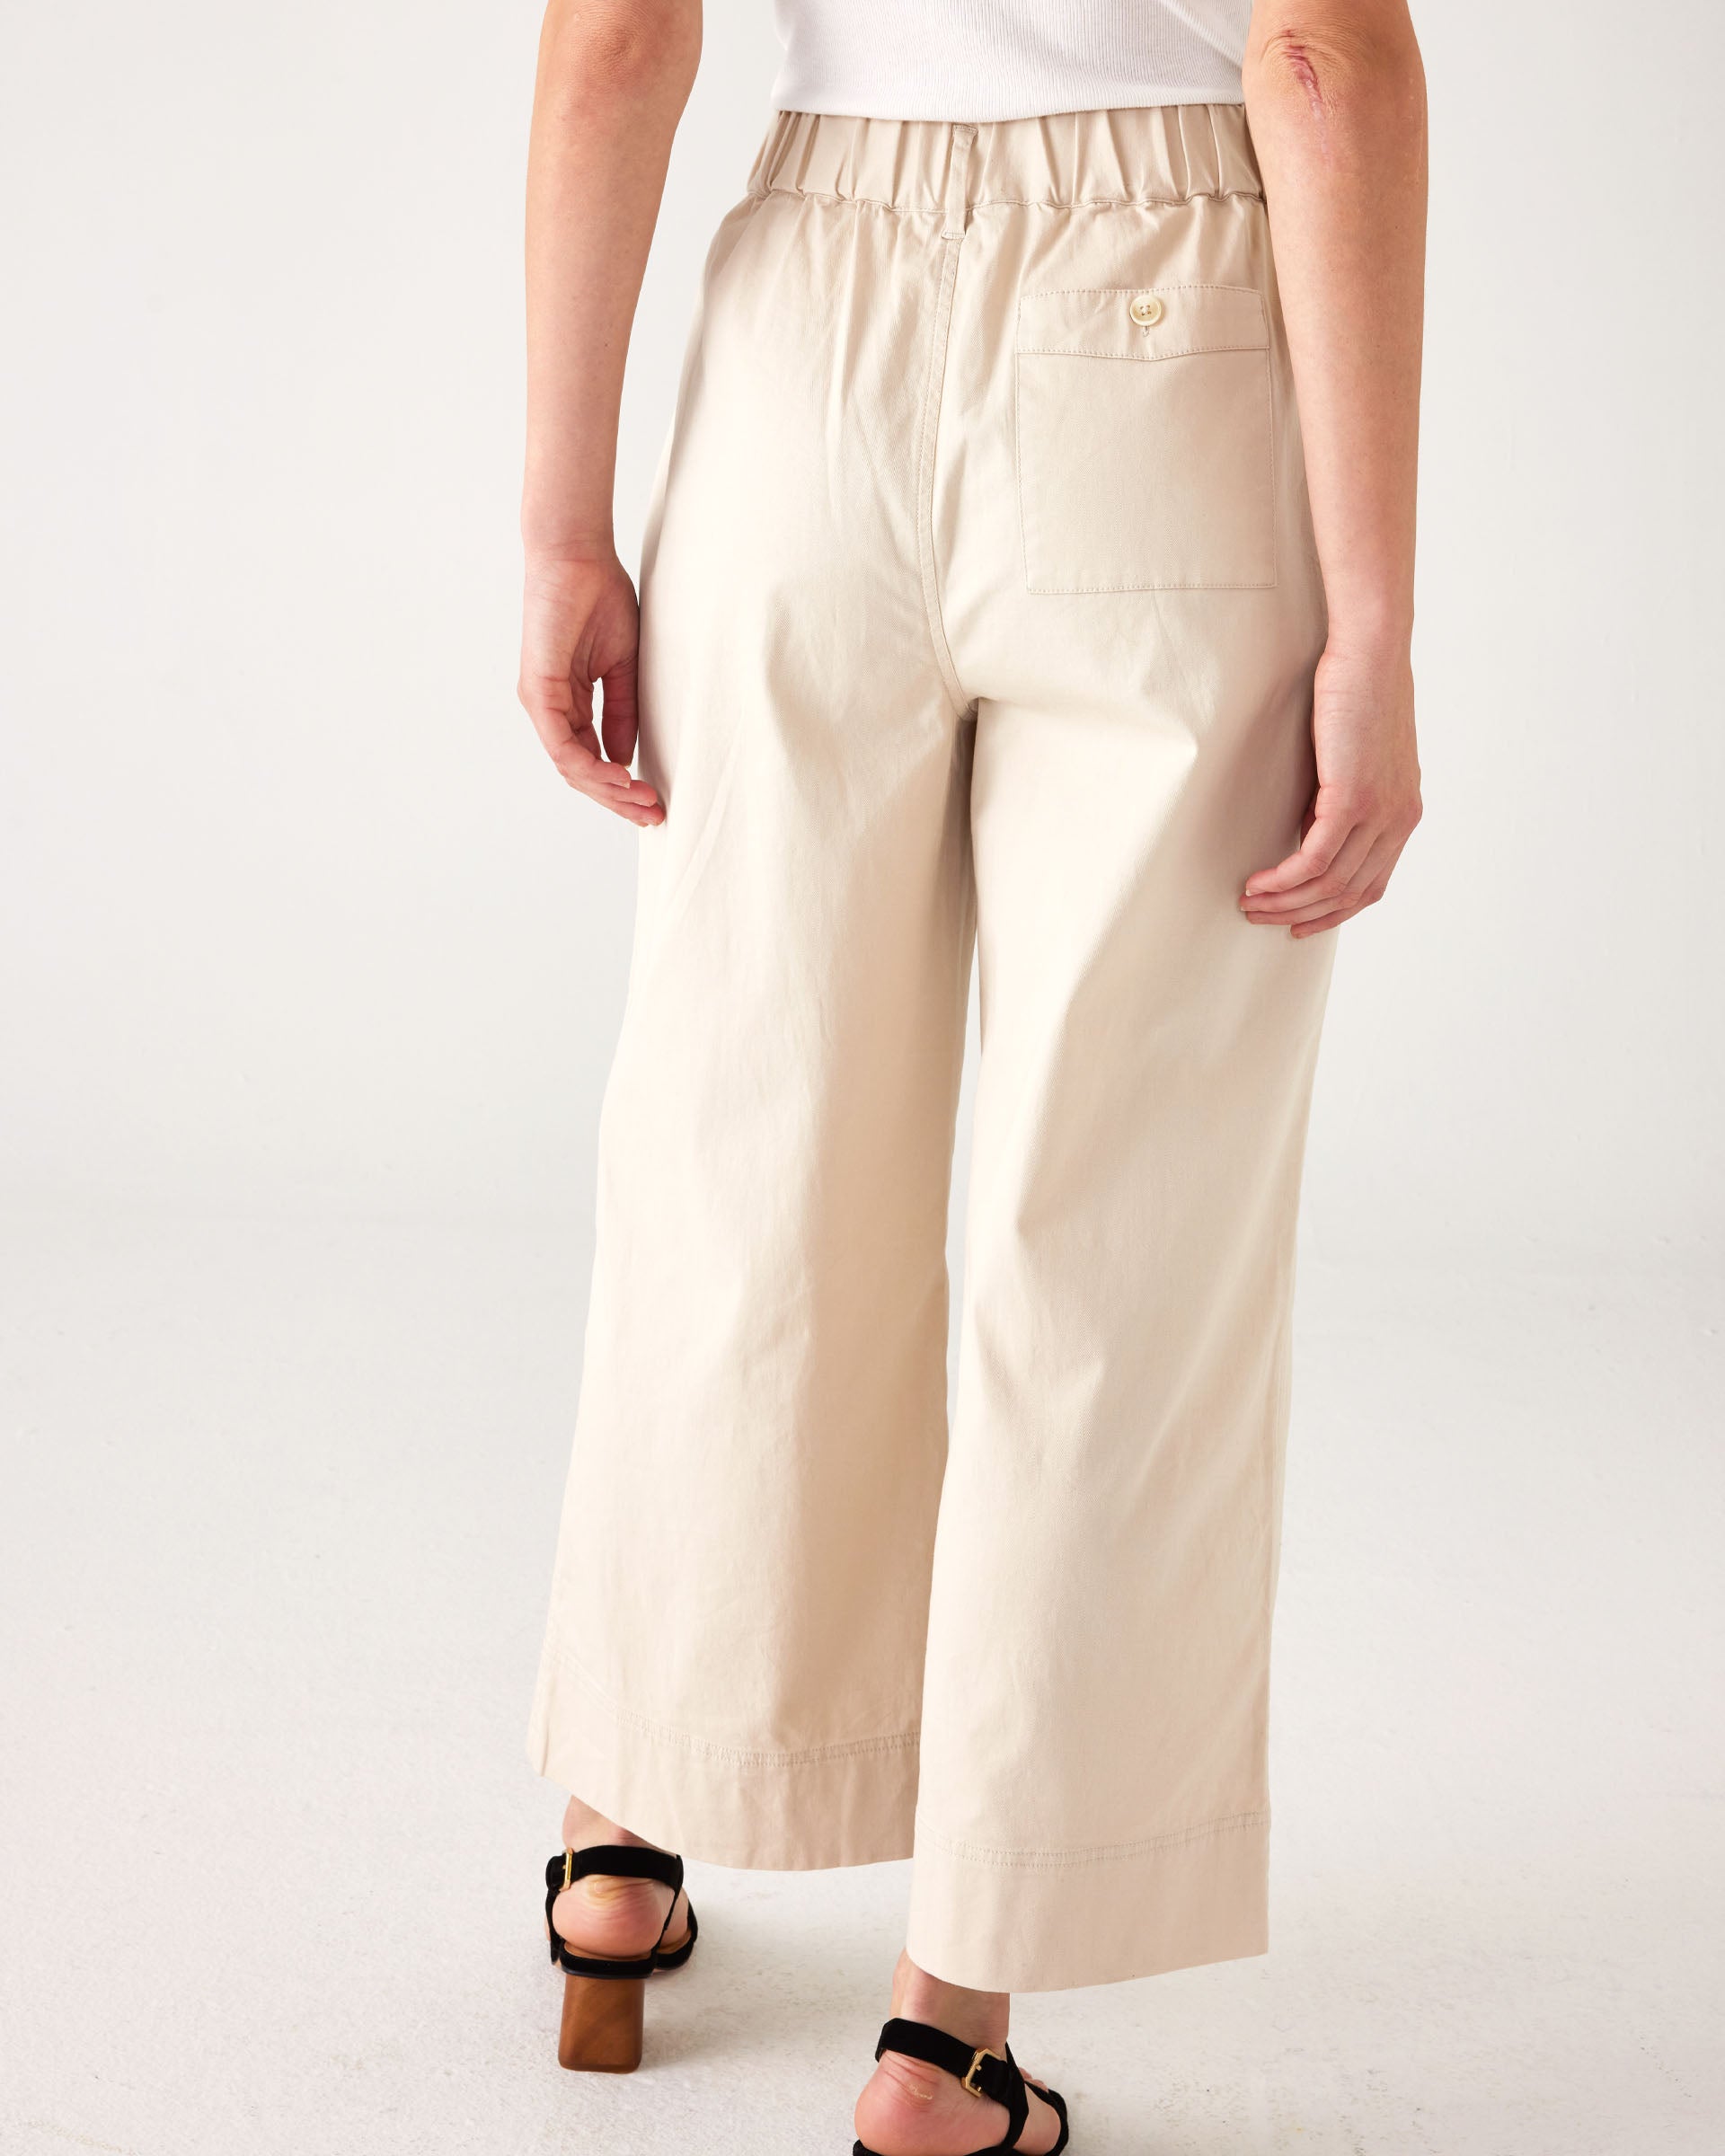 Women's Tan Wide Leg Elastic Waistband Sammie Twill Pants With Front Slant Pockets Rear View